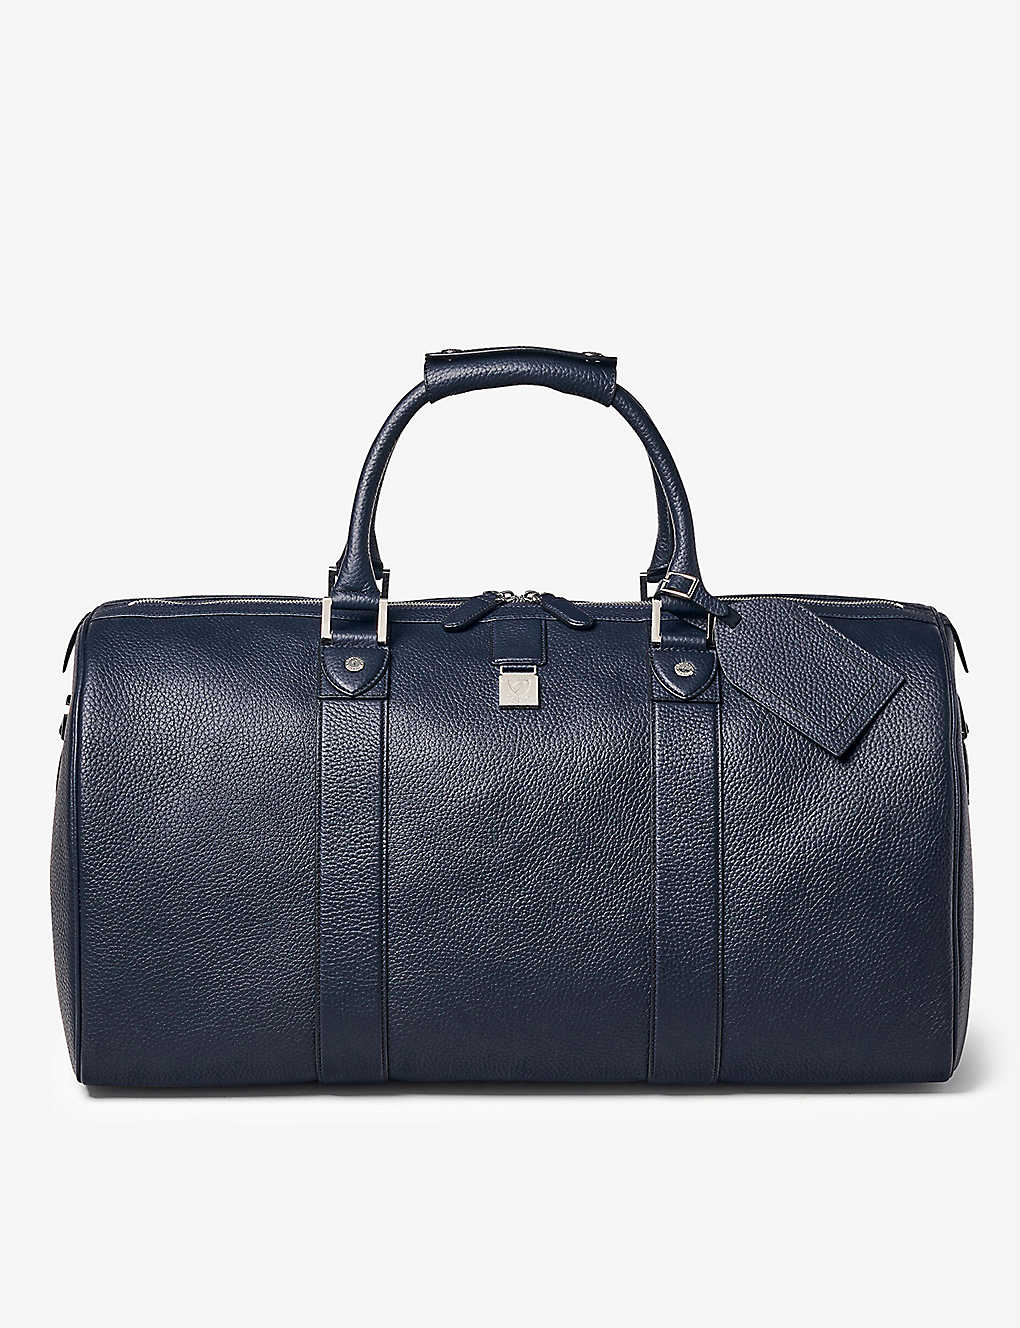 Aspinal Of London Navy Boston Branded Leather Travel Bag